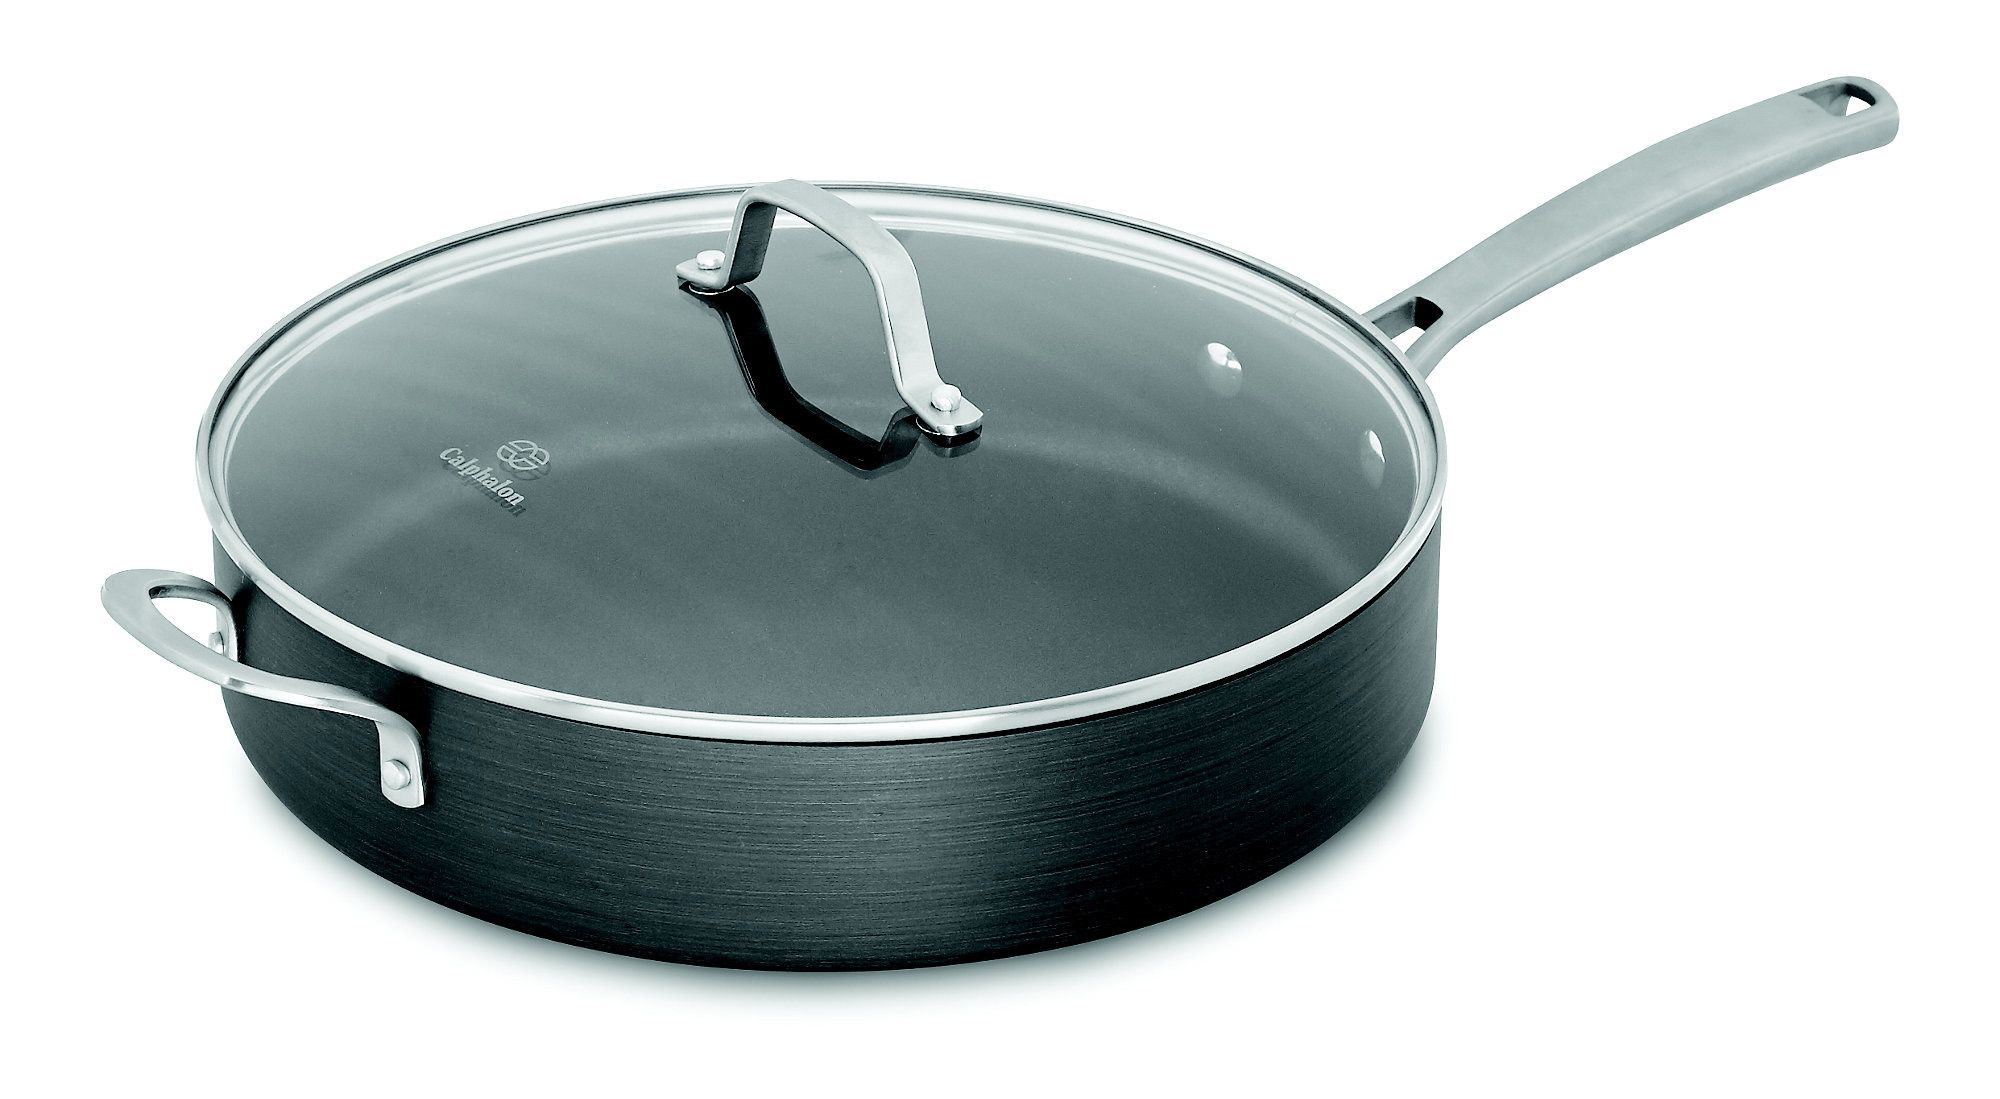 Calphalon Classic Nonstick 10 Fry Pan with Cover